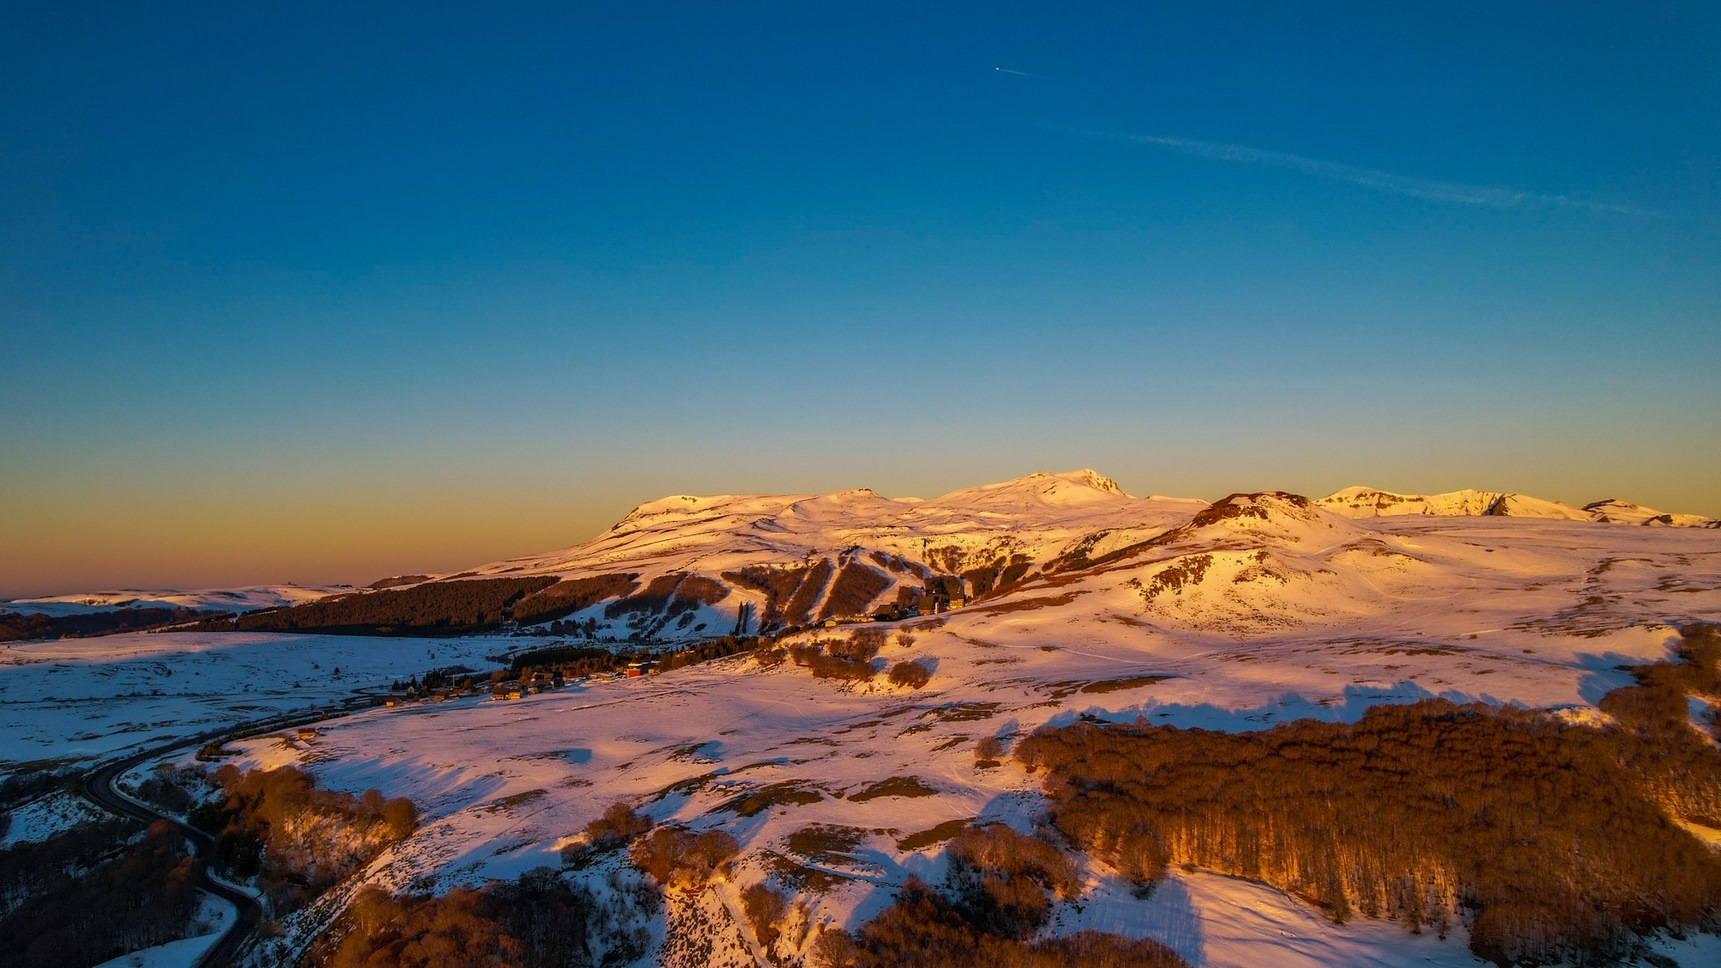 In the Sancy, panorama of the snow-capped peaks of the Sancy massif